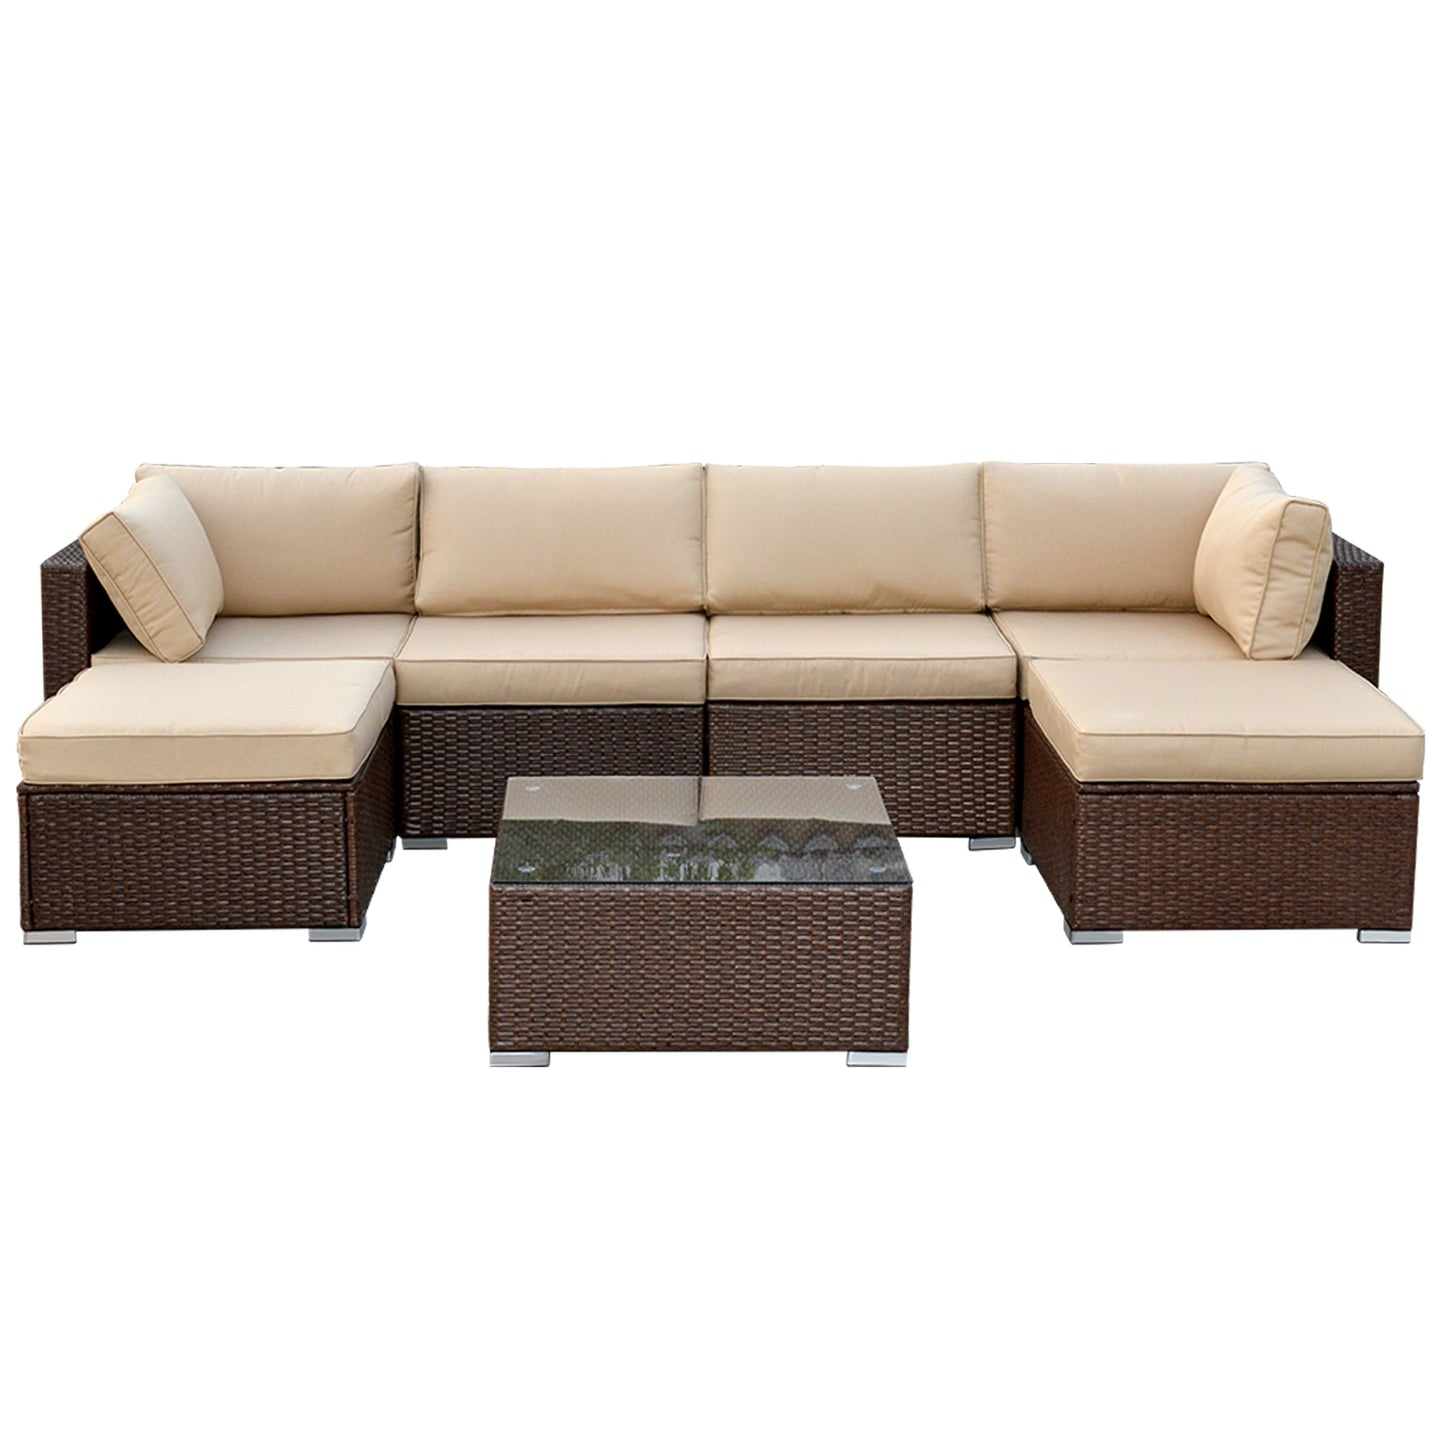 Patio Furniture Sets 9 Piece Outdoor Conversation Set, All Weather Brown PE Wicker Furniture Set with Glass Table, Ottoman Sofas, Removabl Cushions